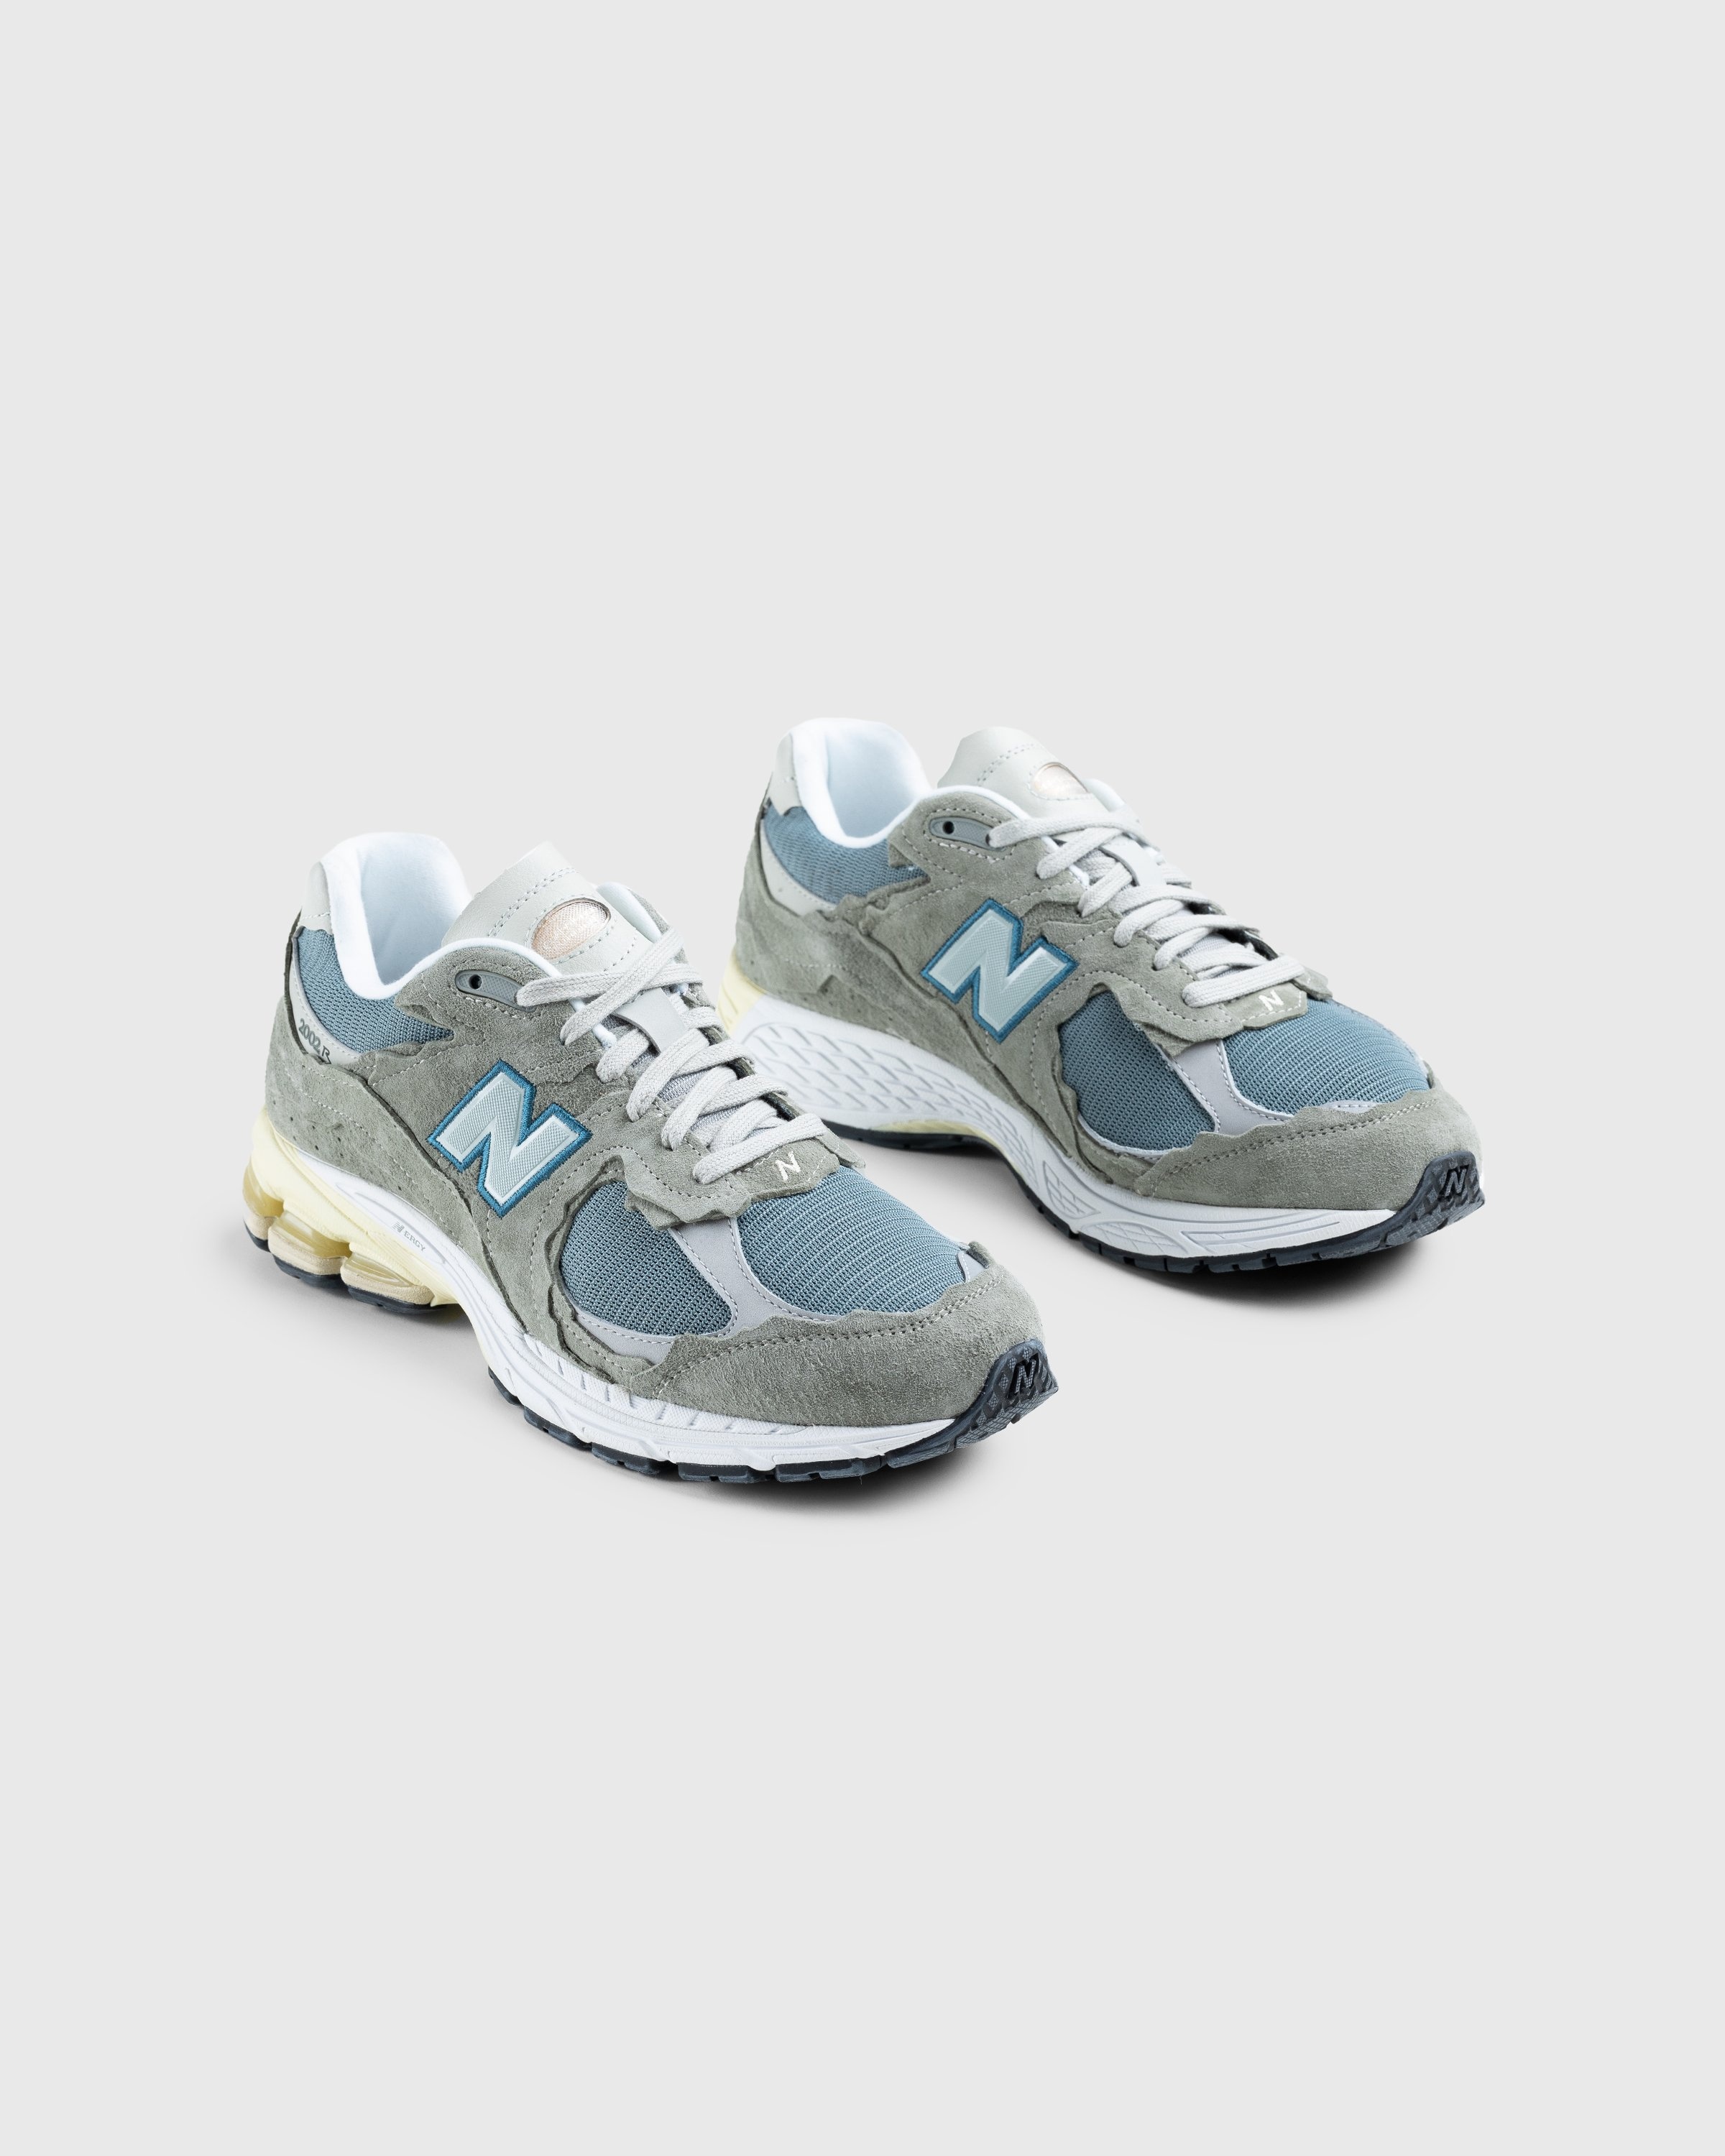 New Balance – M2002RDD Mirage Grey - Low Top Sneakers - Grey - Image 3